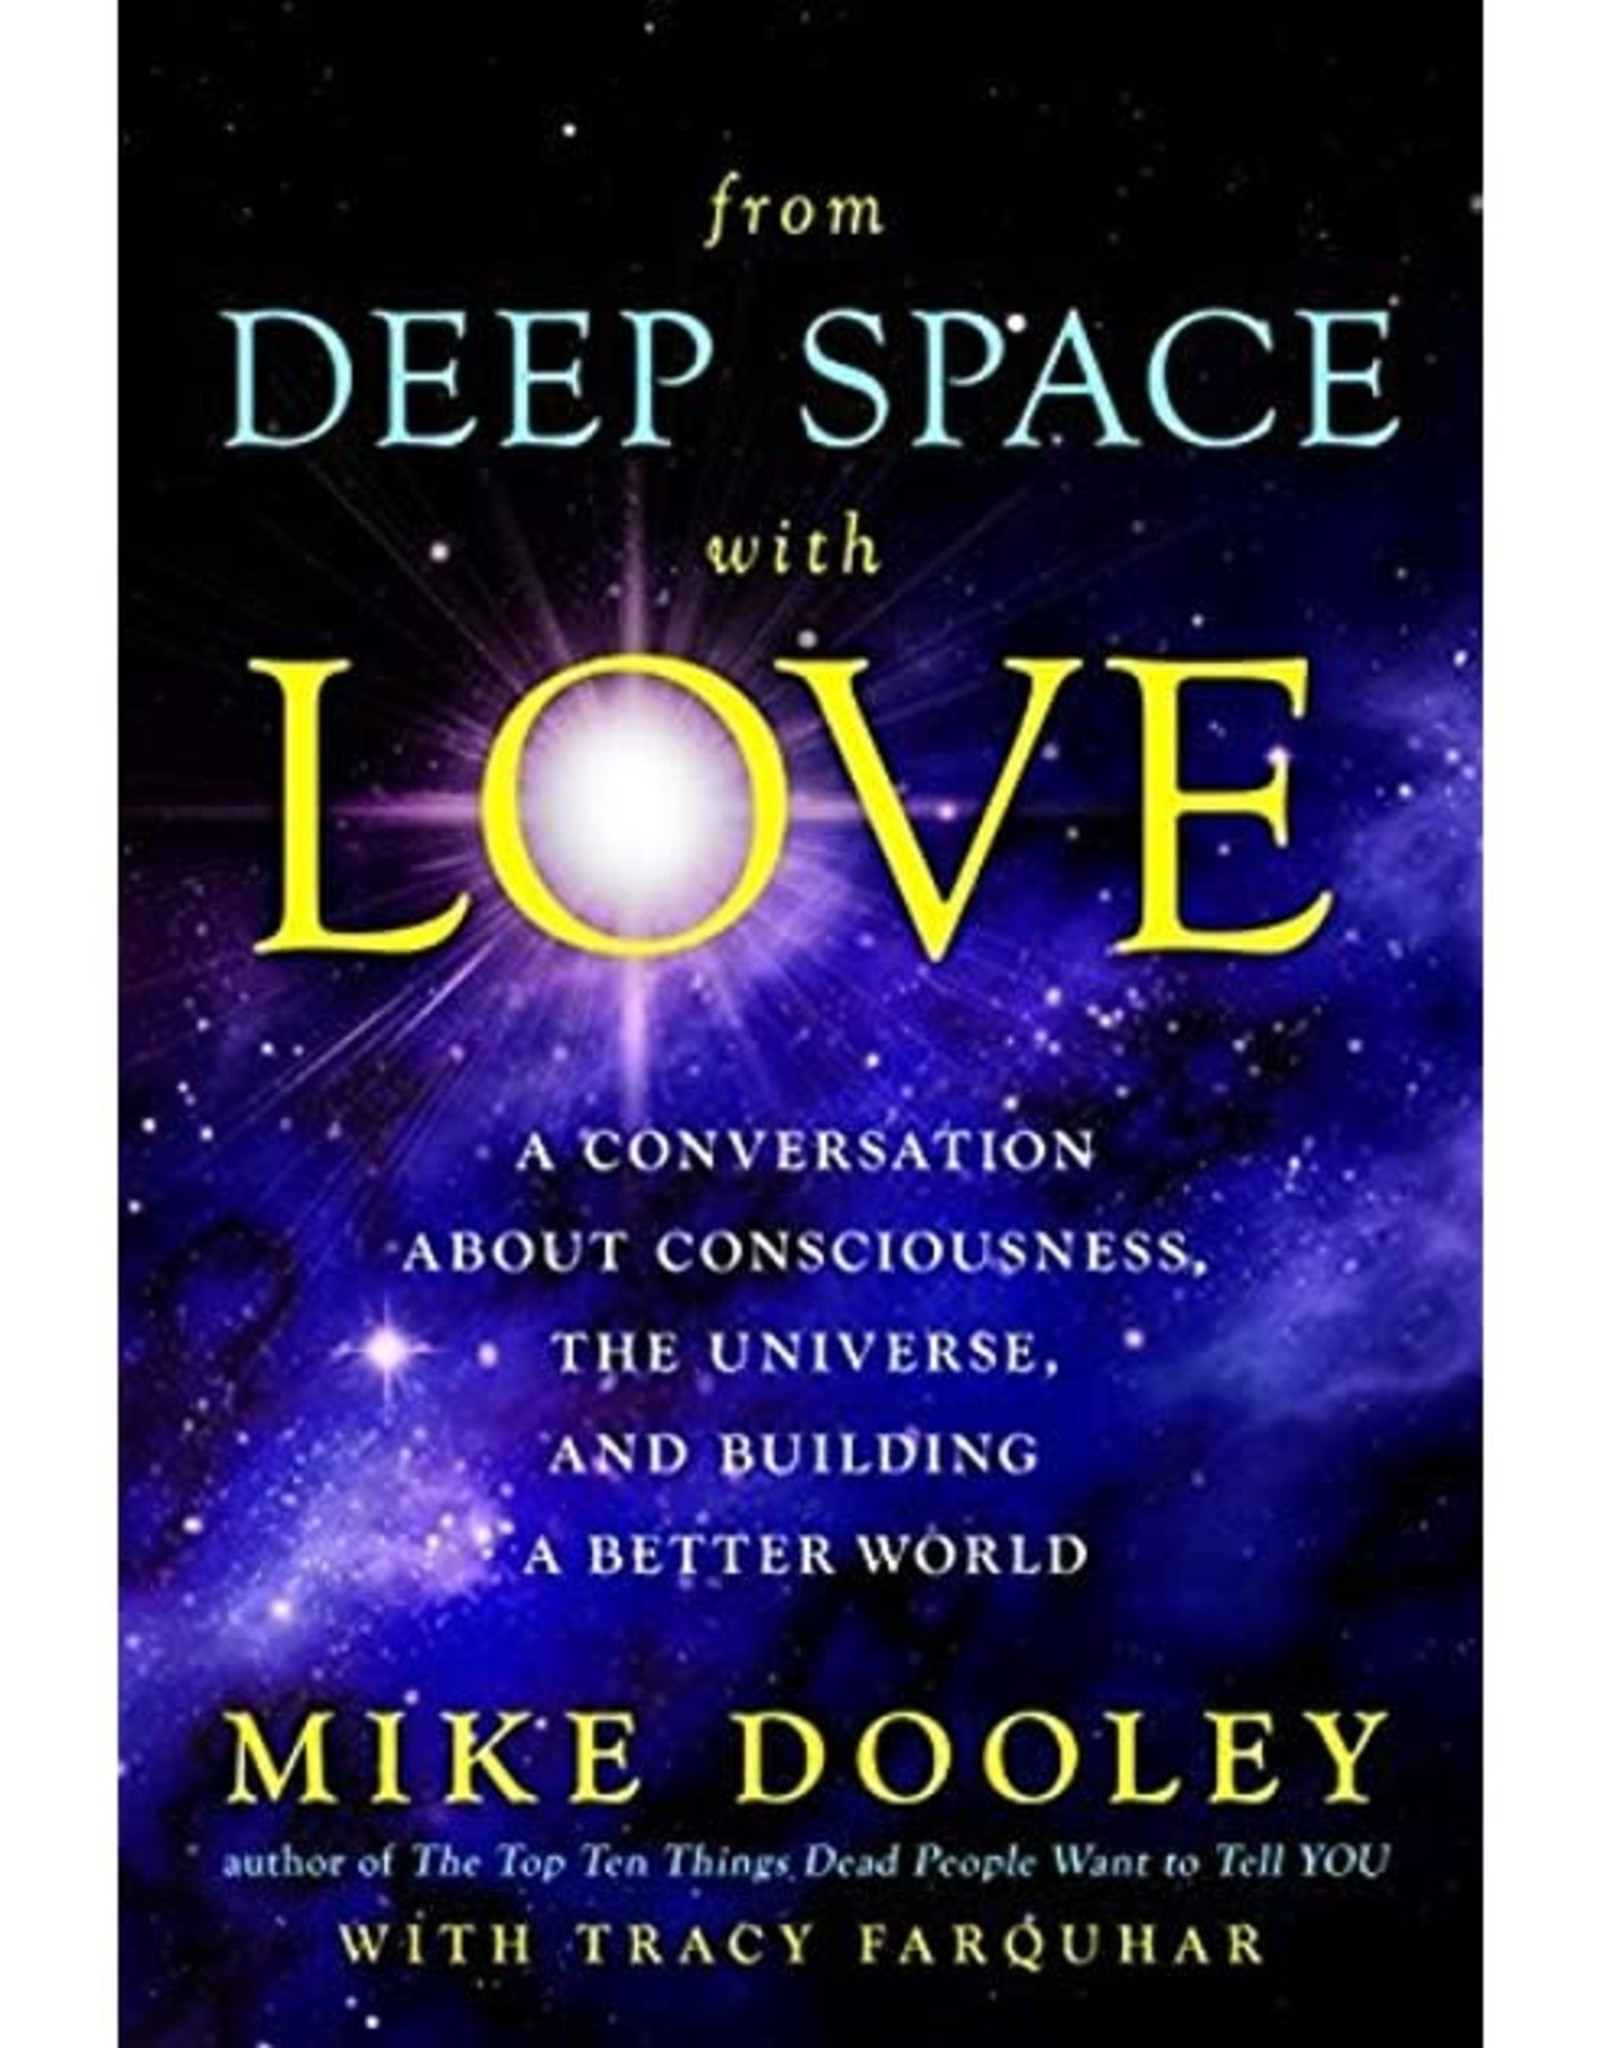 Mike Dooley From Deep Space with Love by Mike Dooley